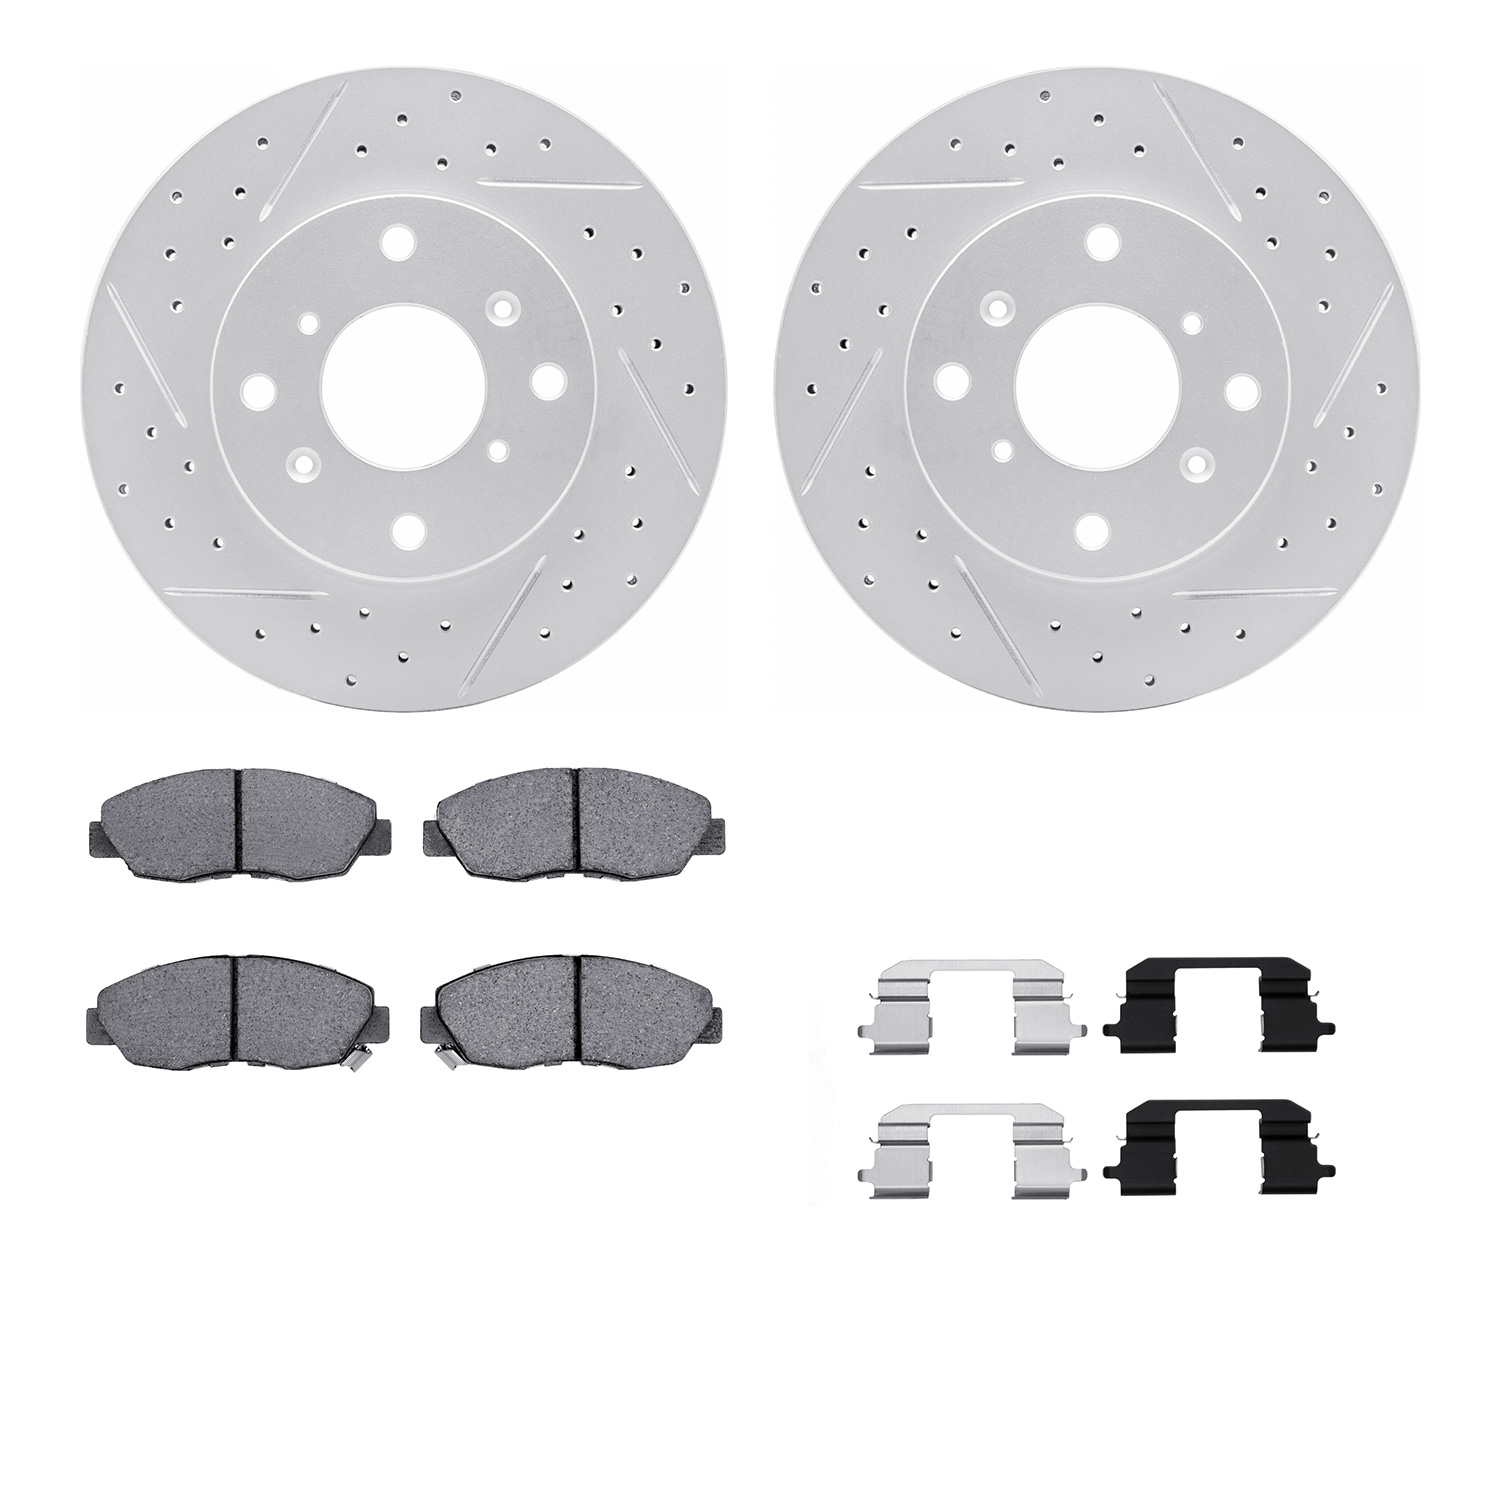 2512-59019 Geoperformance Drilled/Slotted Rotors w/5000 Advanced Brake Pads Kit & Hardware, 1998-1999 Acura/Honda, Position: Fro